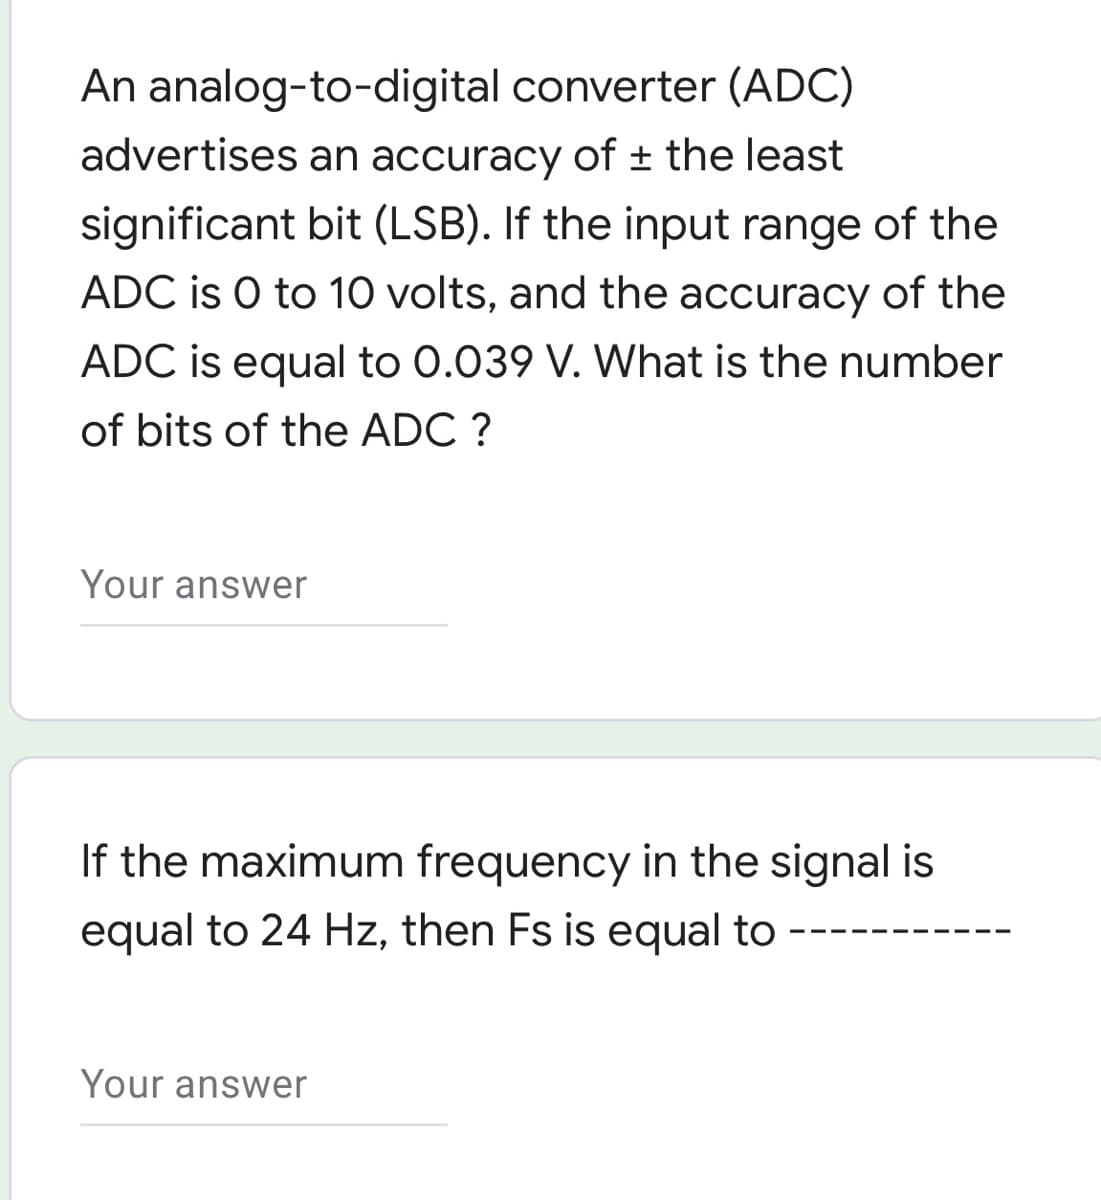 An analog-to-digital converter (ADC)
advertises an accuracy of ± the least
significant bit (LSB). If the input range of the
ADC is O to 10 volts, and the accuracy of the
ADC is equal to 0.039 V. What is the number
of bits of the ADC ?
Your answer
If the maximum frequency in the signal is
equal to 24 Hz, then Fs is equal to
Your answer
